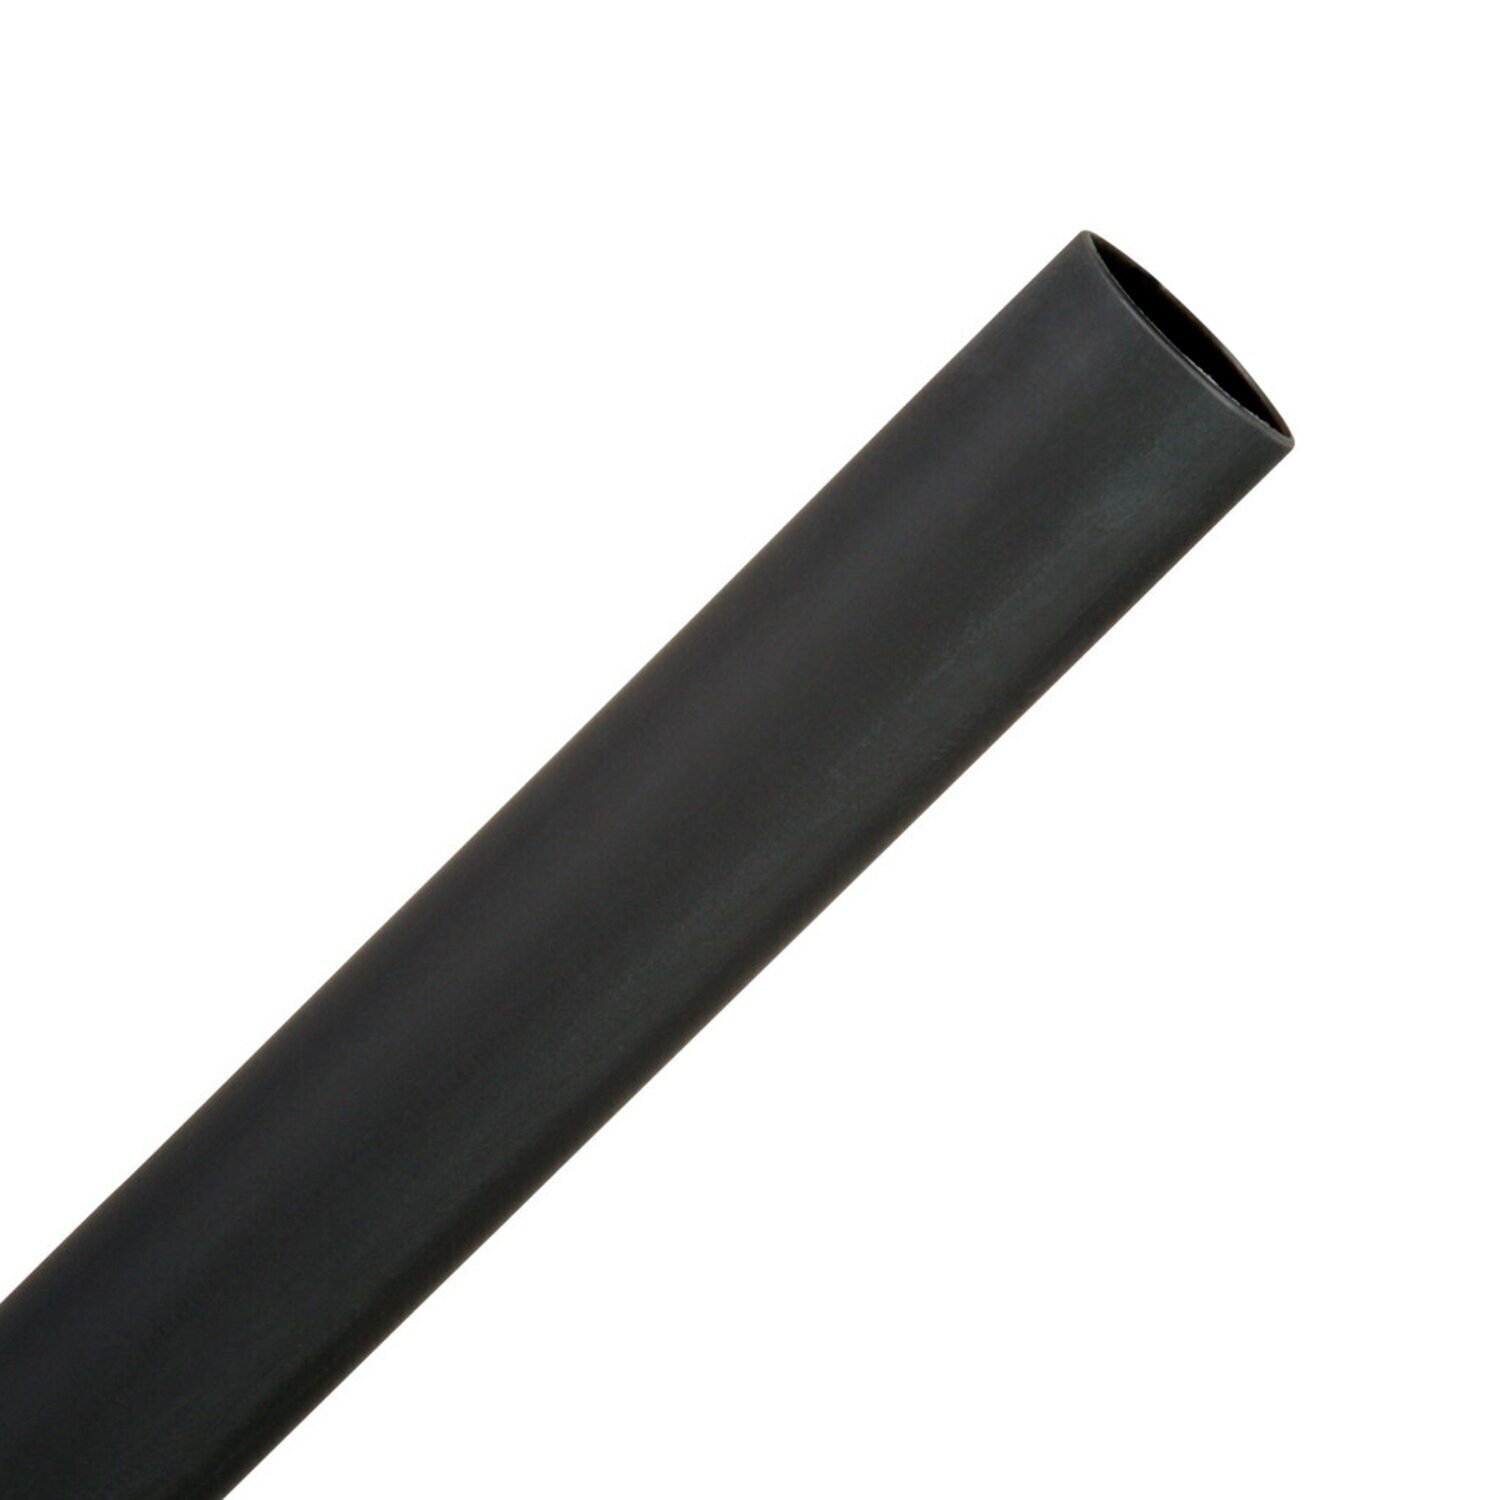 7010396789 - 3M Thin-Wall Heat Shrink Tubing EPS-300, Adhesive-Lined, 3/4" Black
2-in piece, 2000/Case